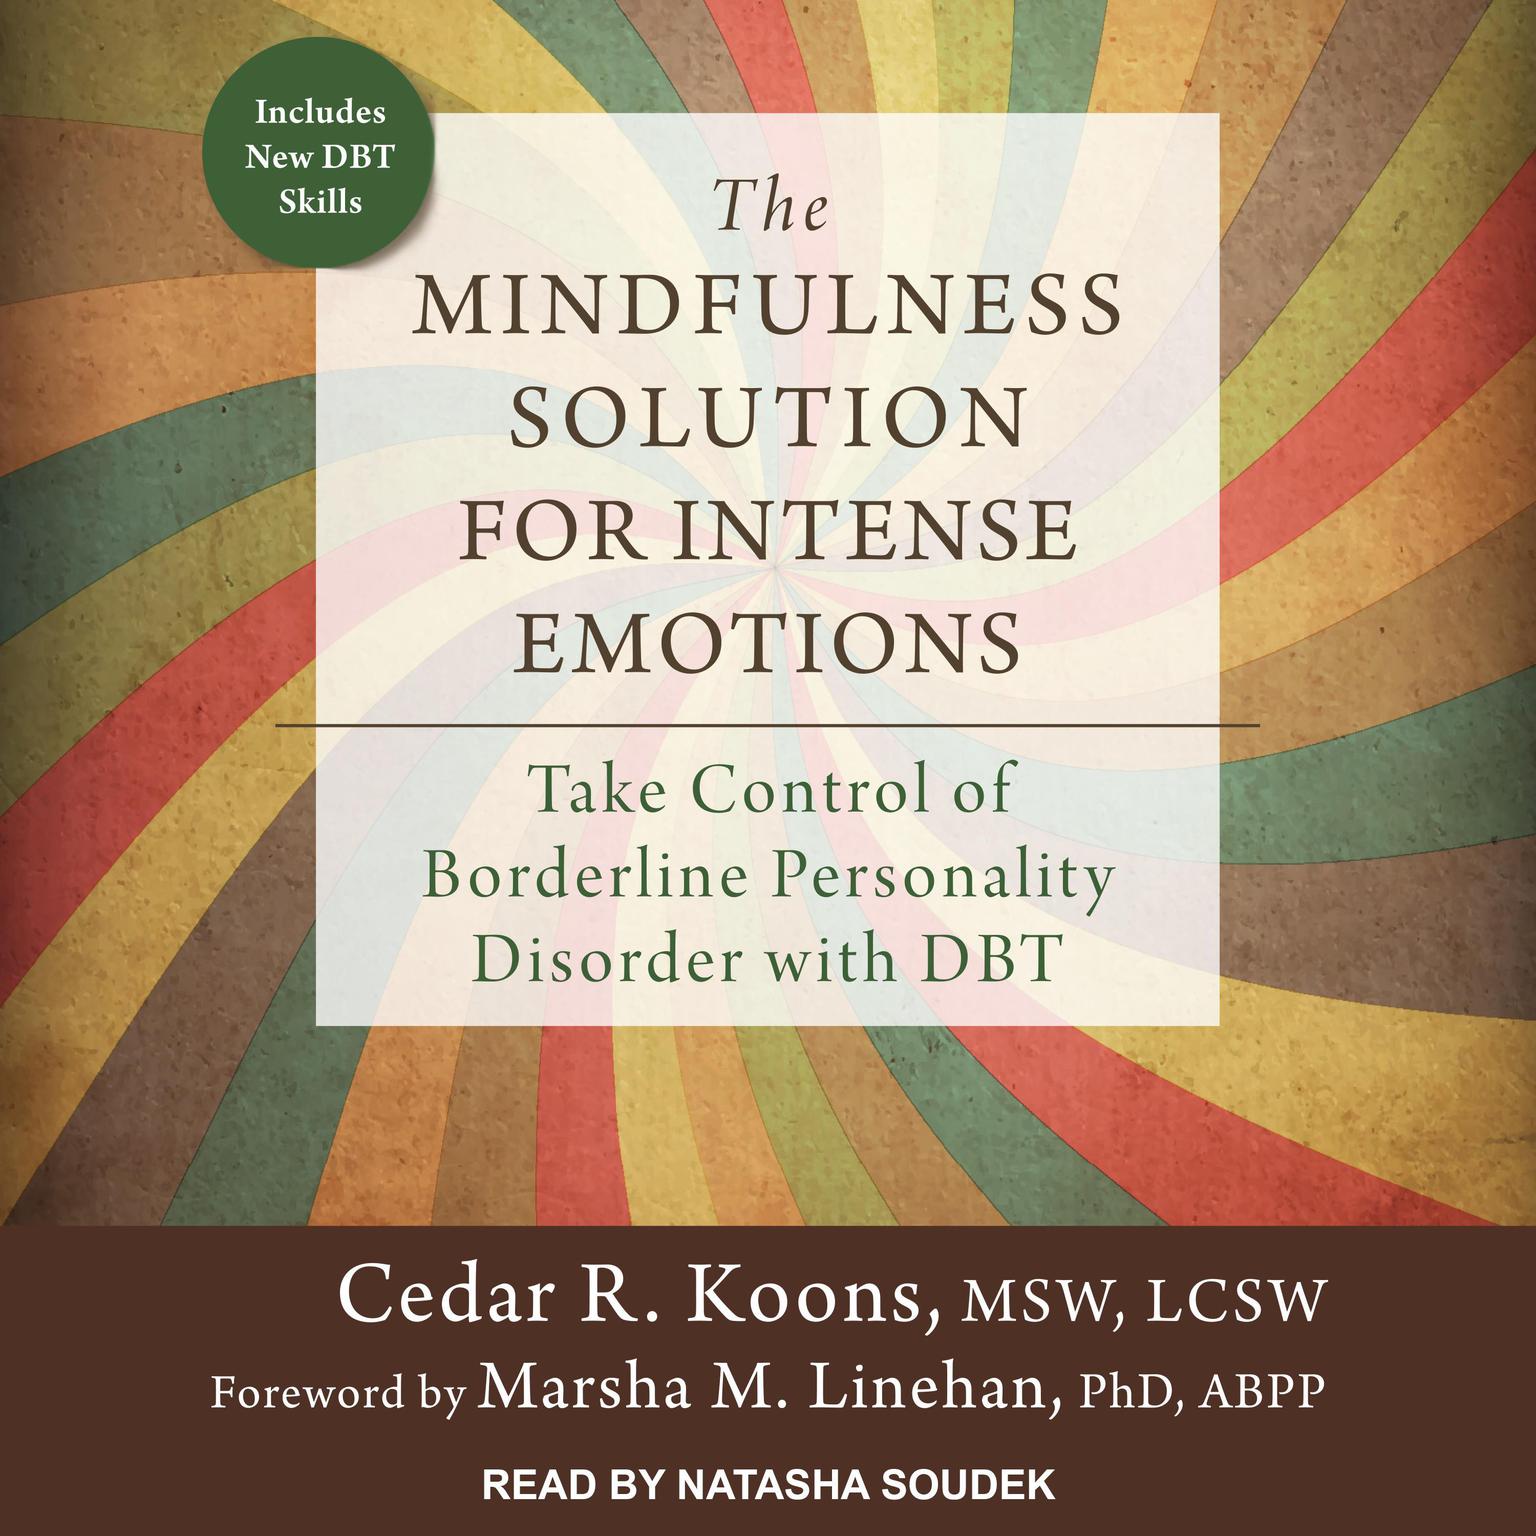 The Mindfulness Solution for Intense Emotions: Take Control of Borderline Personality Disorder with DBT Audiobook, by Cedar R. Koons